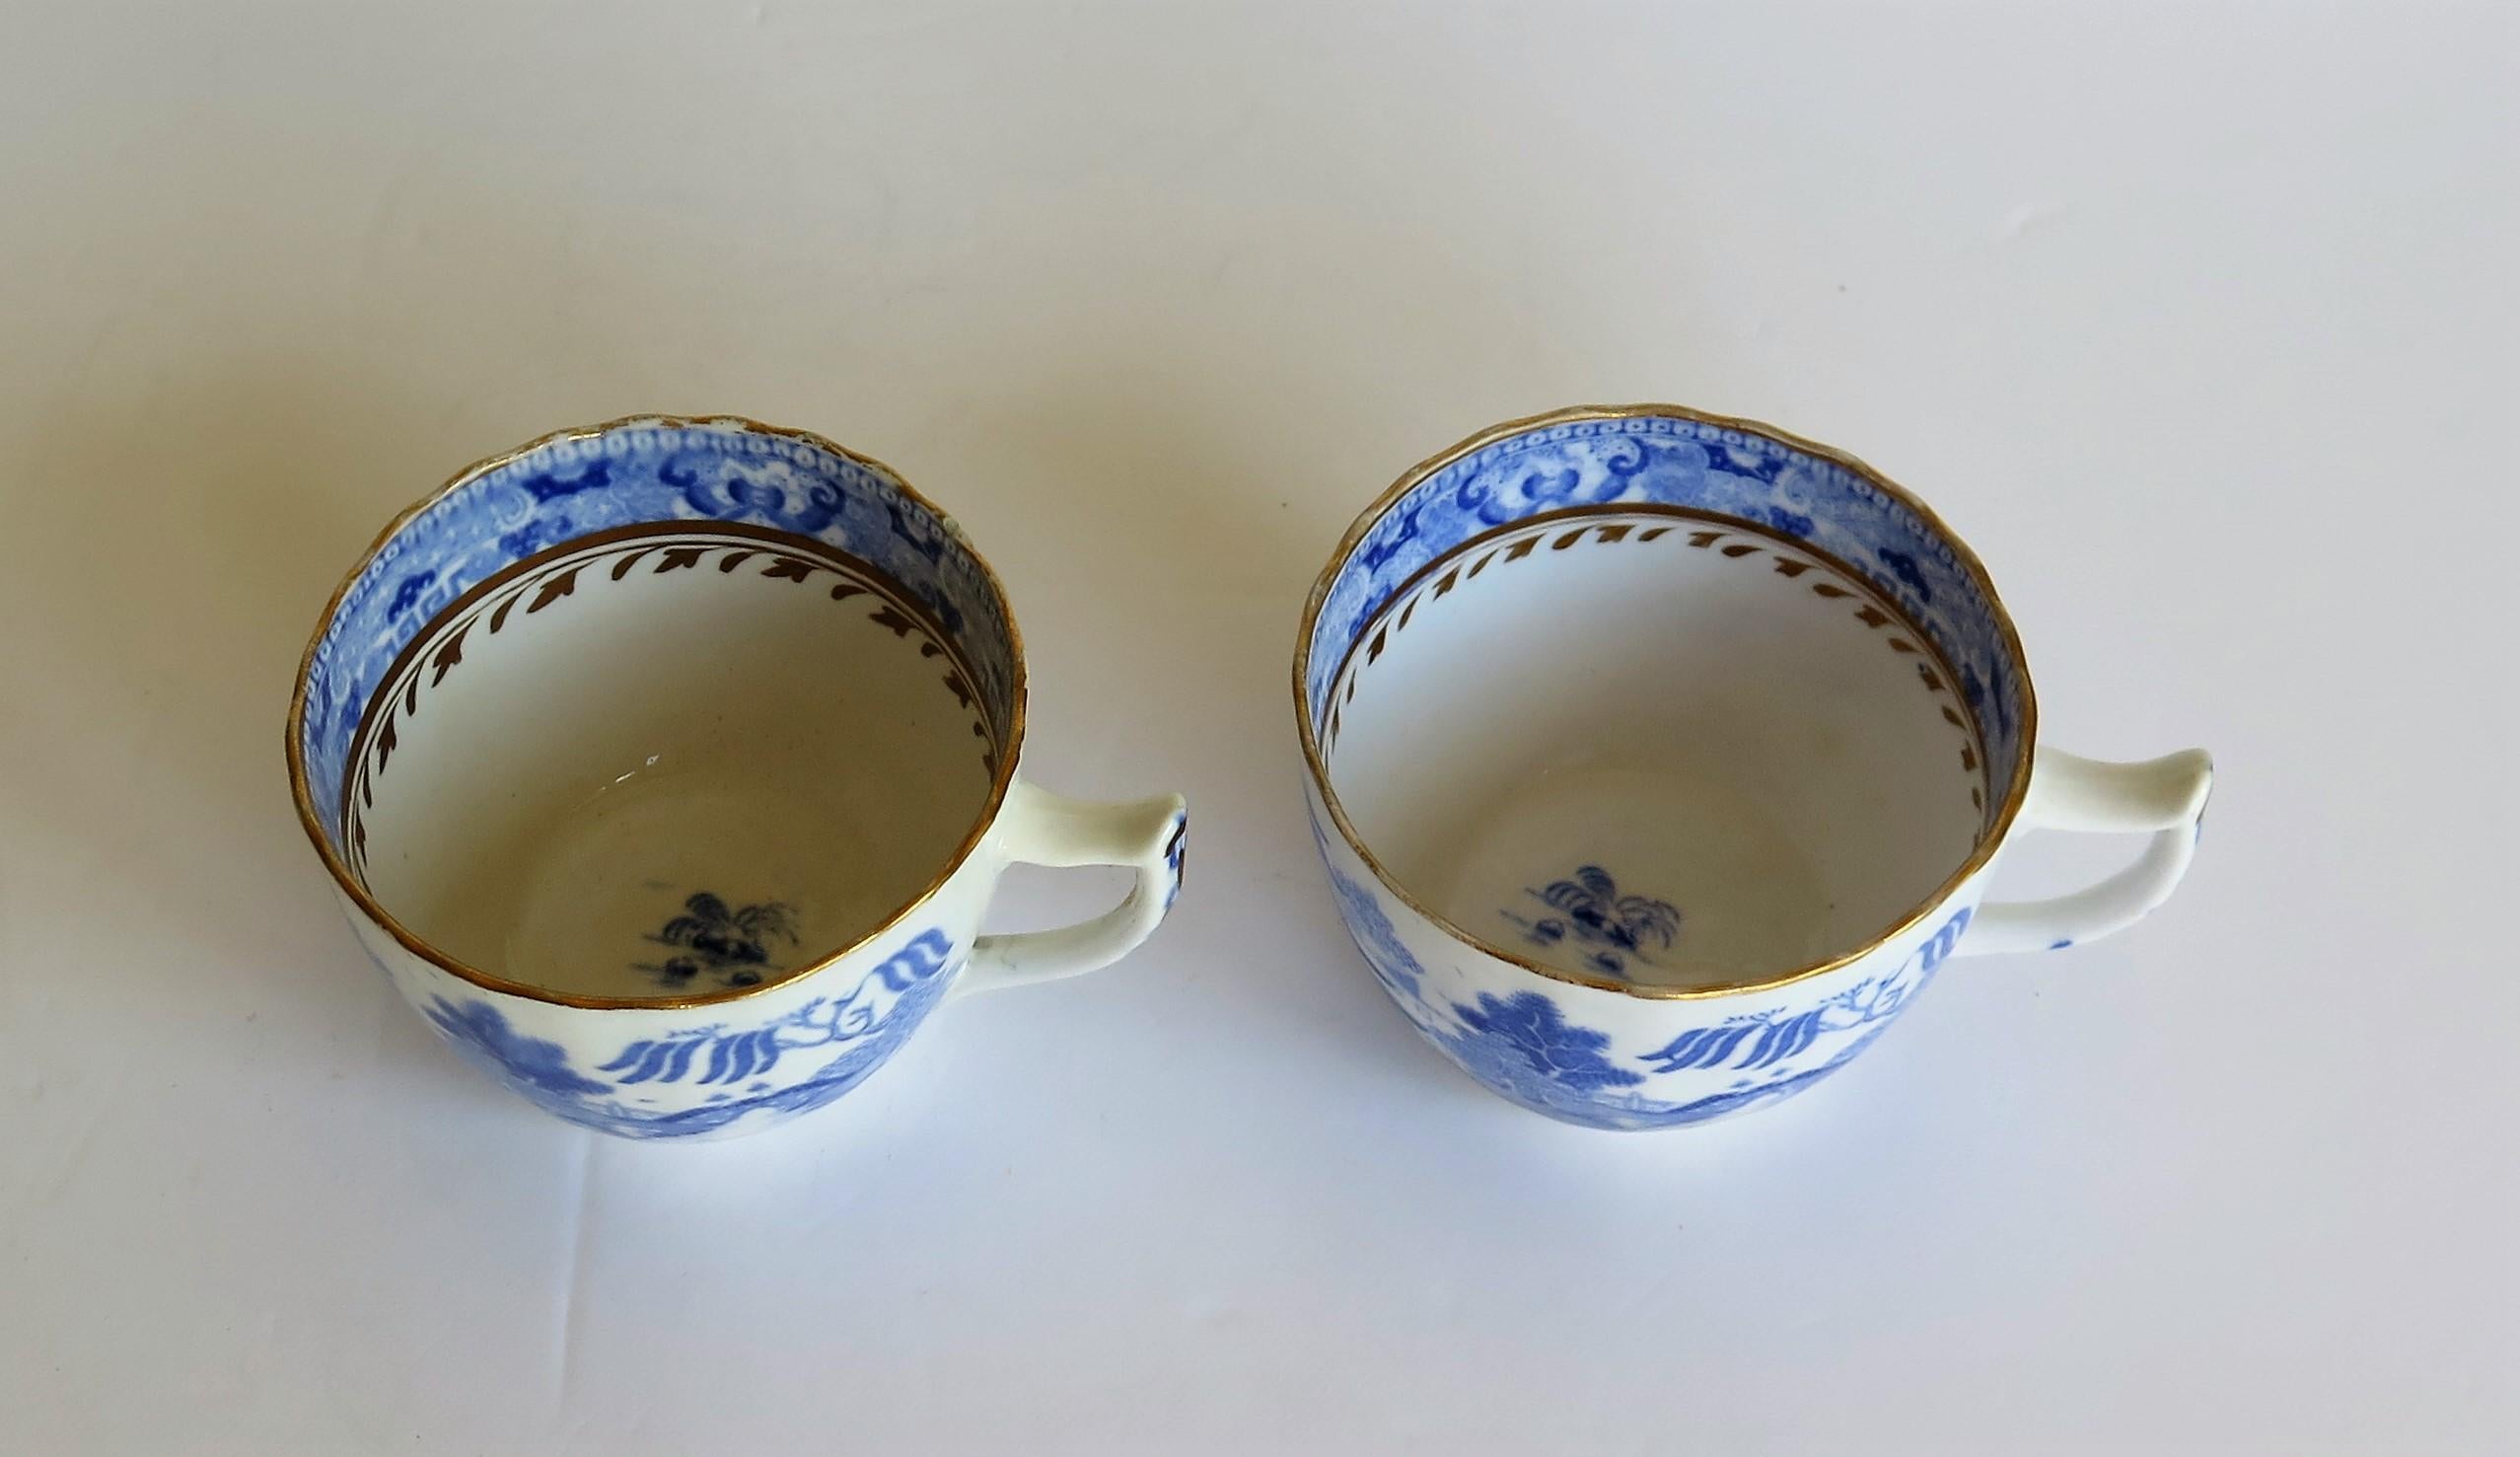 Miles Mason Porcelain Pair of Tea Cups Broseley Blue and White Pattern, Ca. 1805 For Sale 7